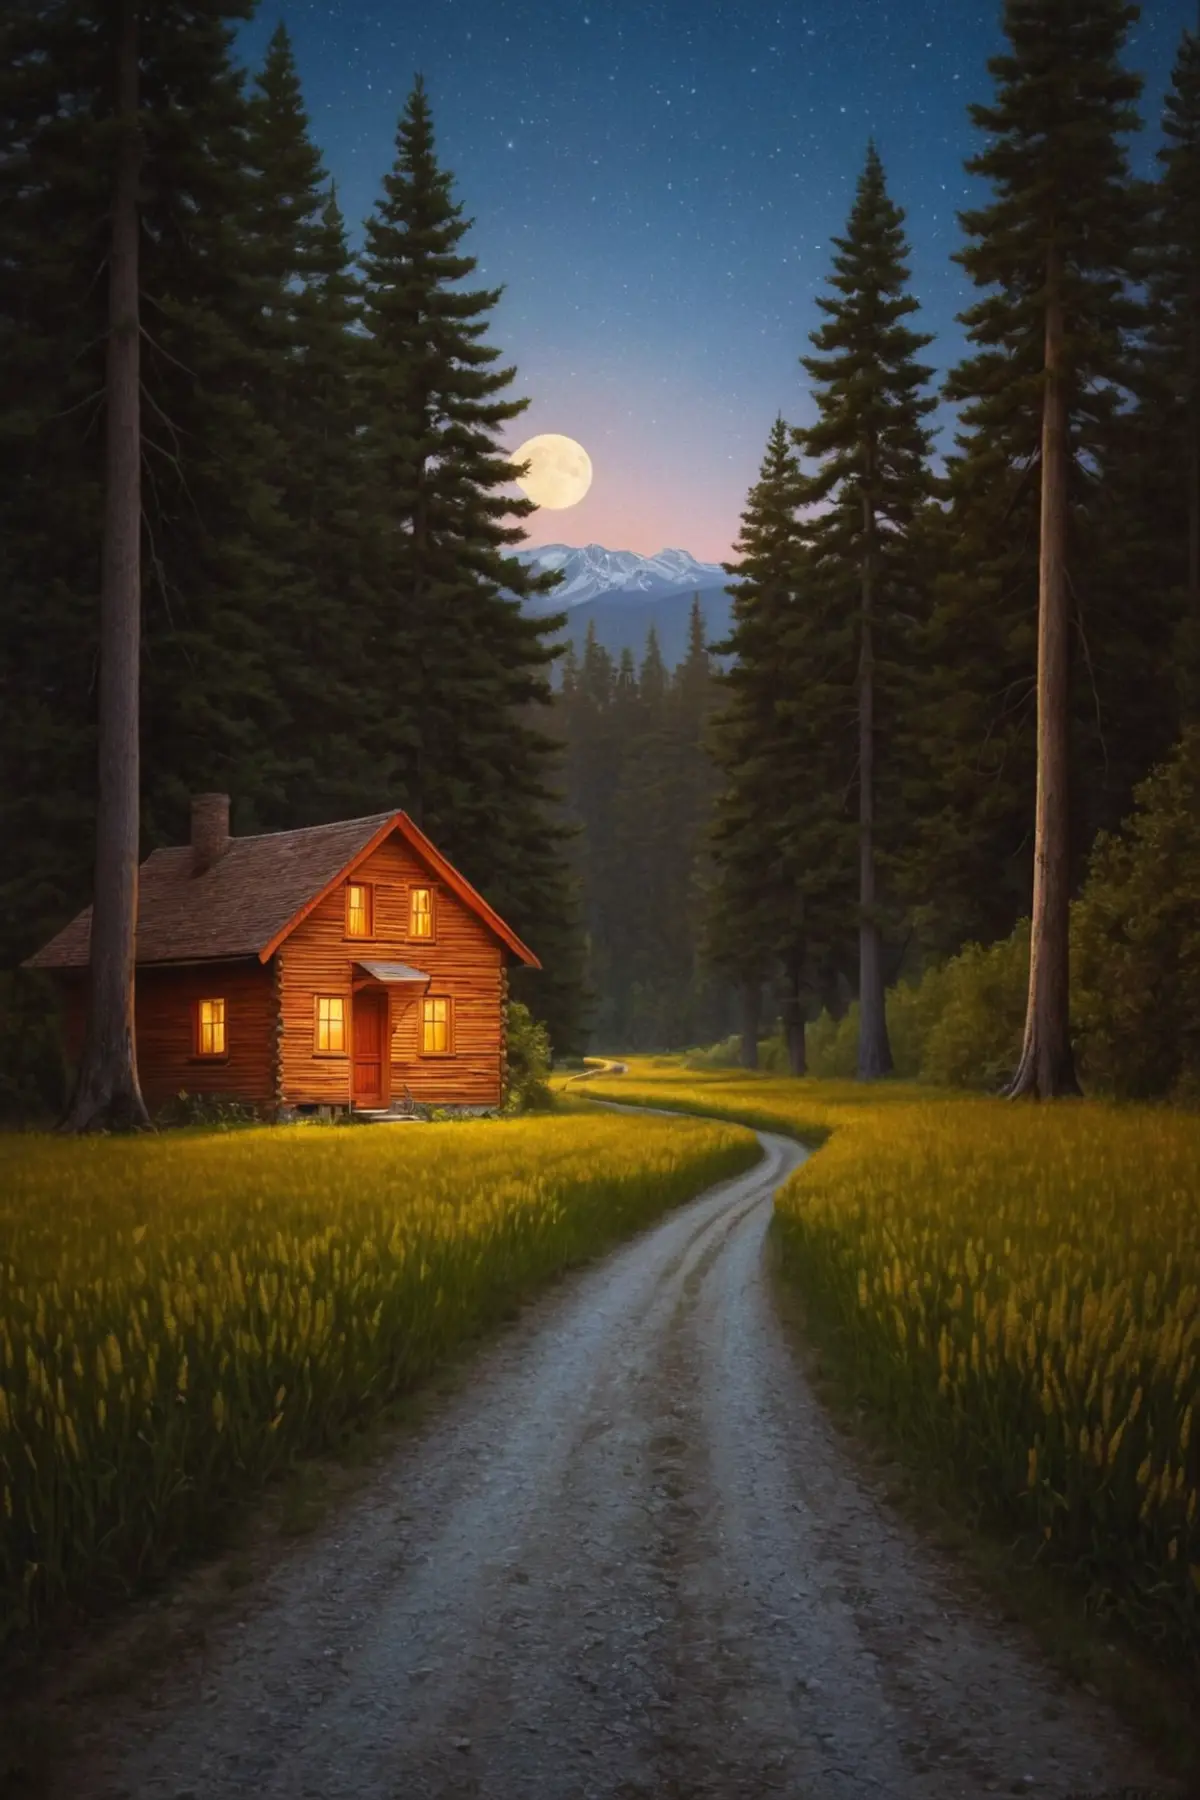 A warmly lit wooden cabin nestled among towering pine trees under a star-speckled full moon sky. A winding dirt path leads to the cabin. 